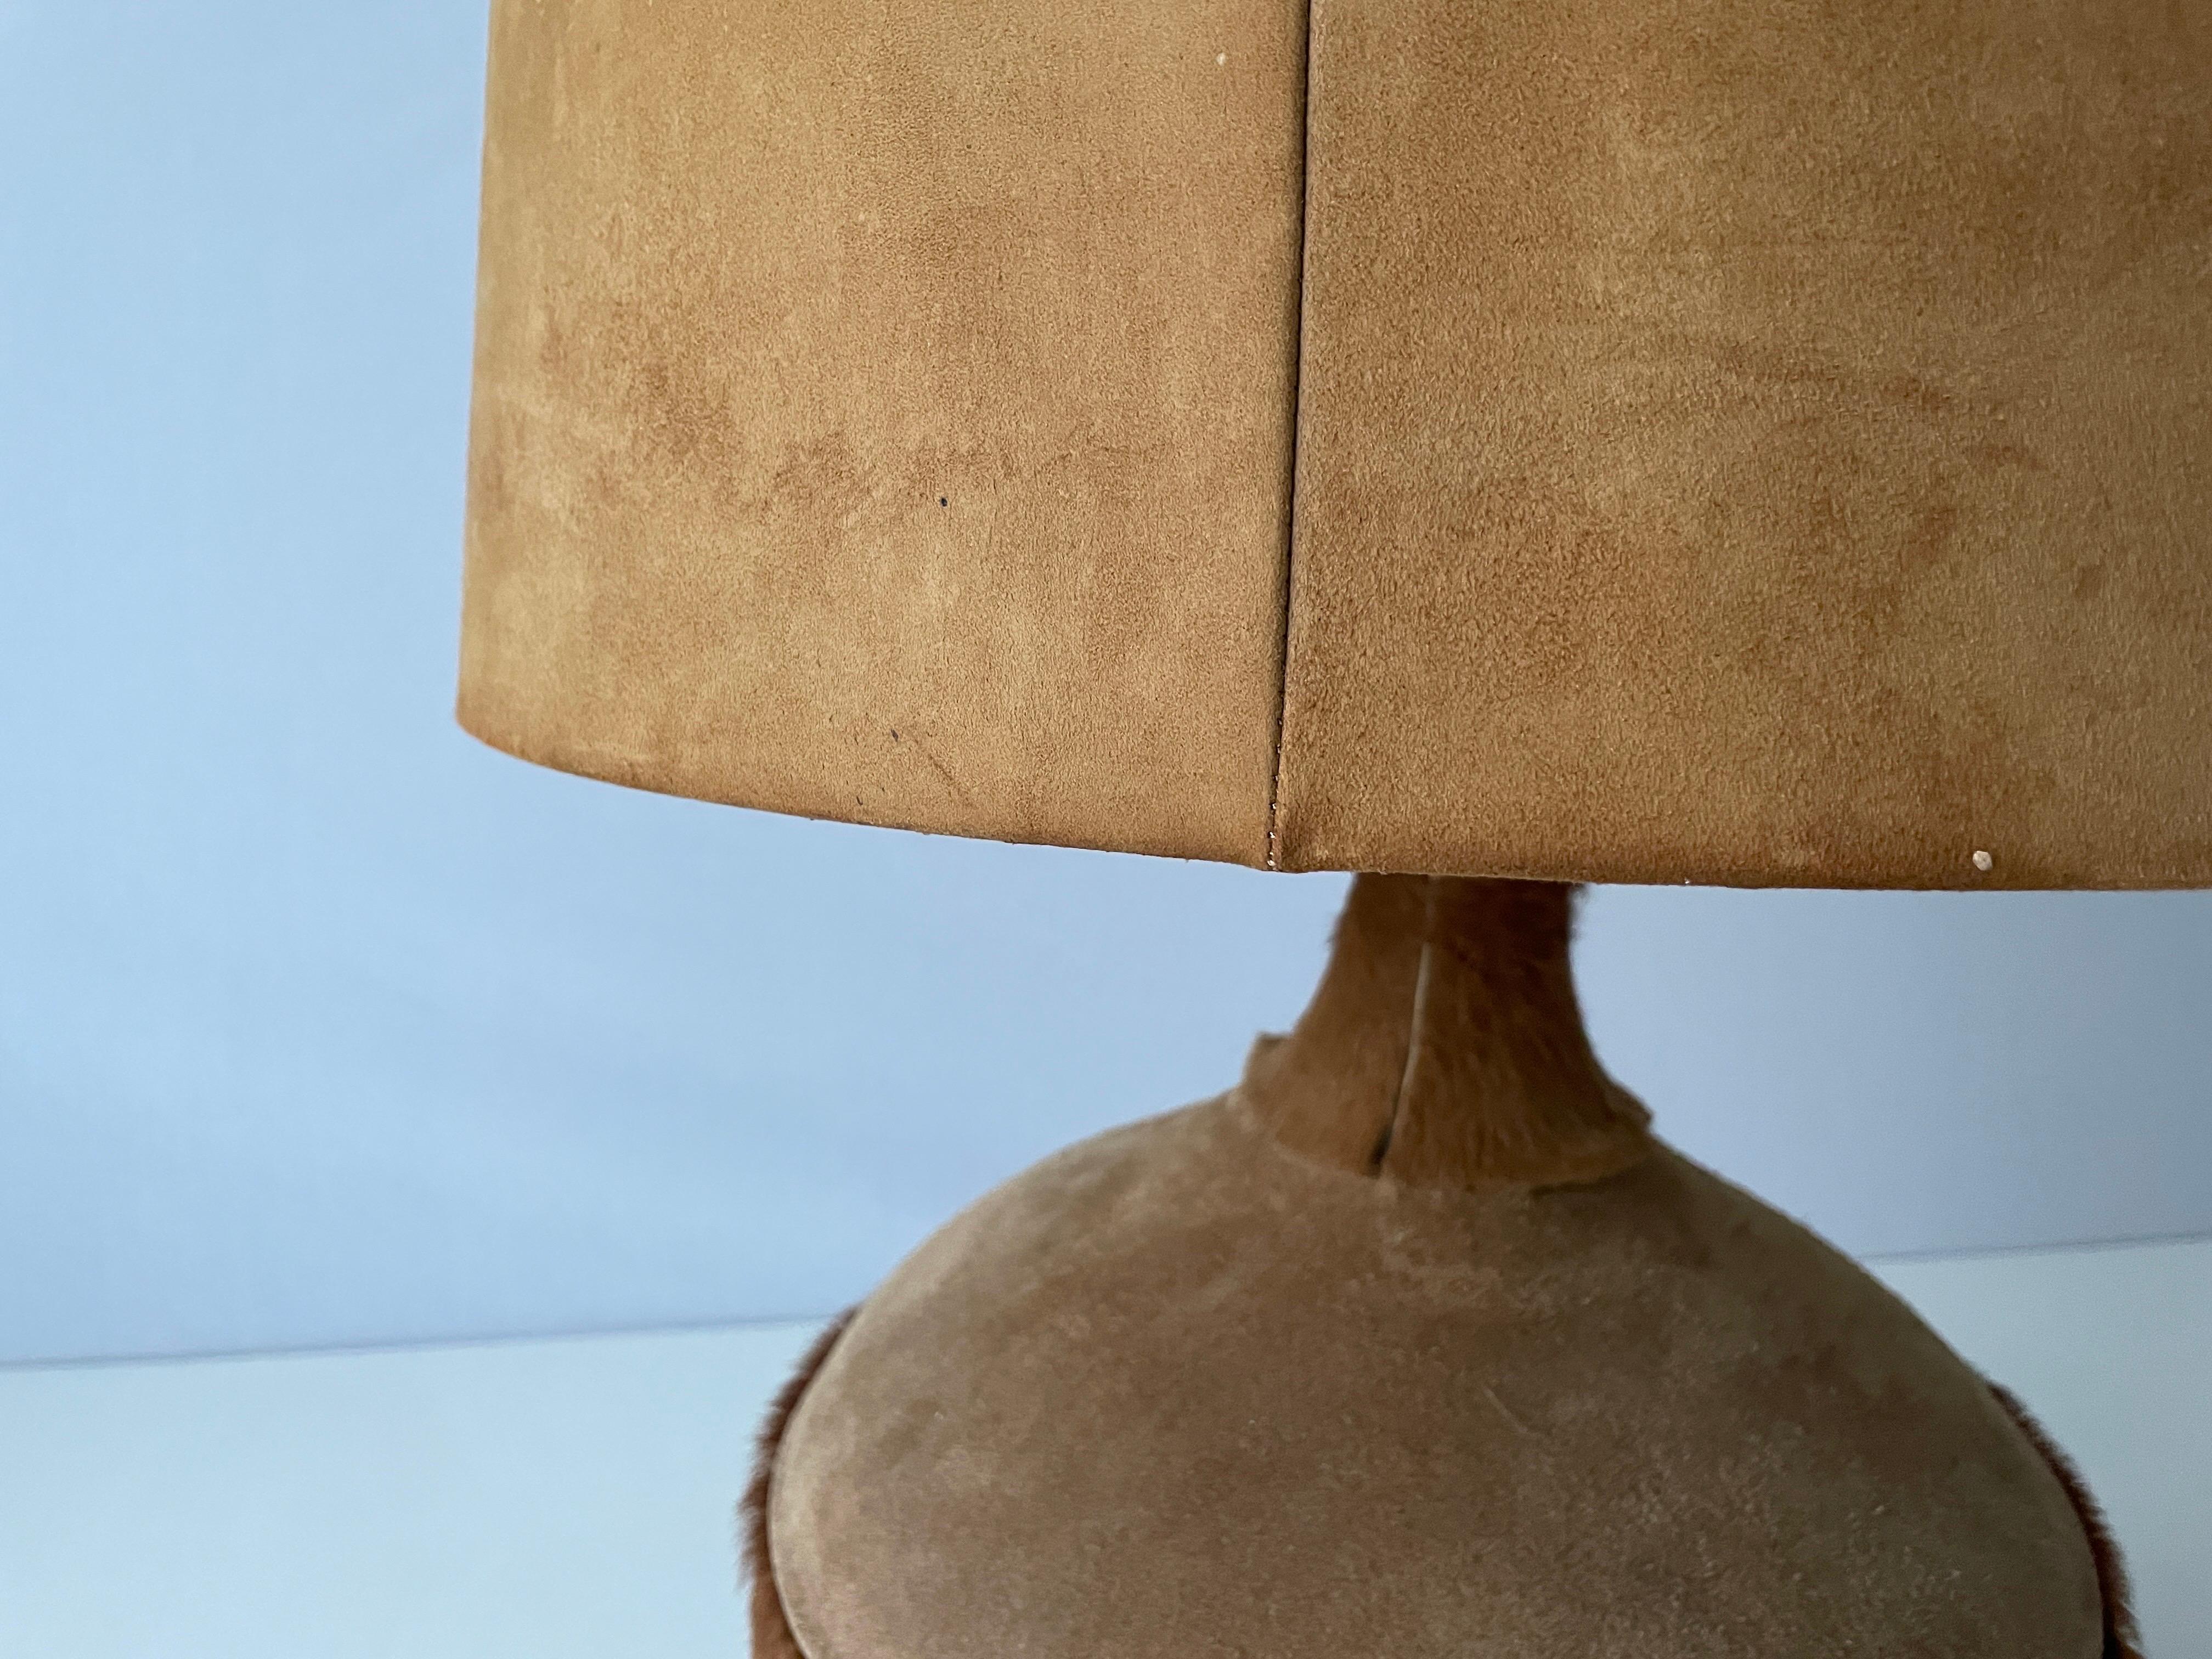 Danish Tan Suede Leather and Glass Shade Floor or Table Lamp, 1960s, Denmark For Sale